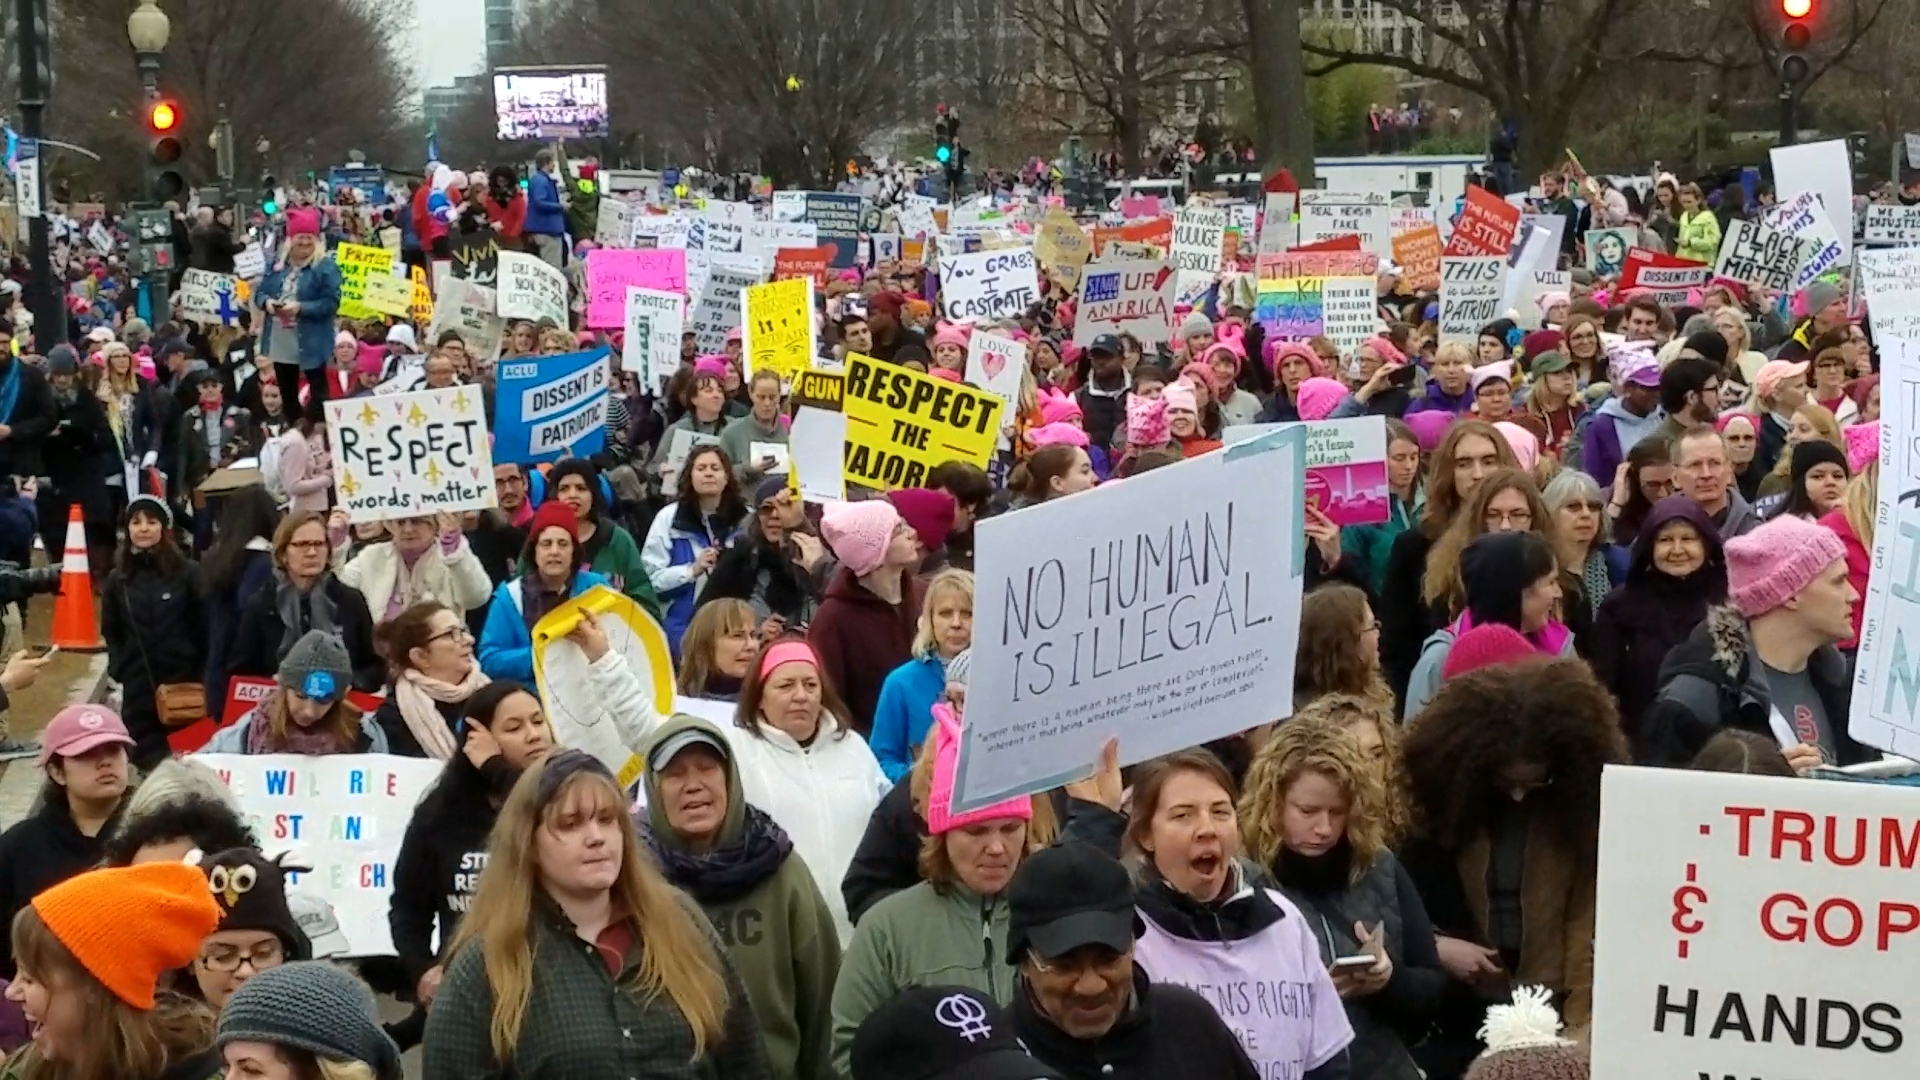 Thousands gathered in DC one day after inauguration for Women’s March